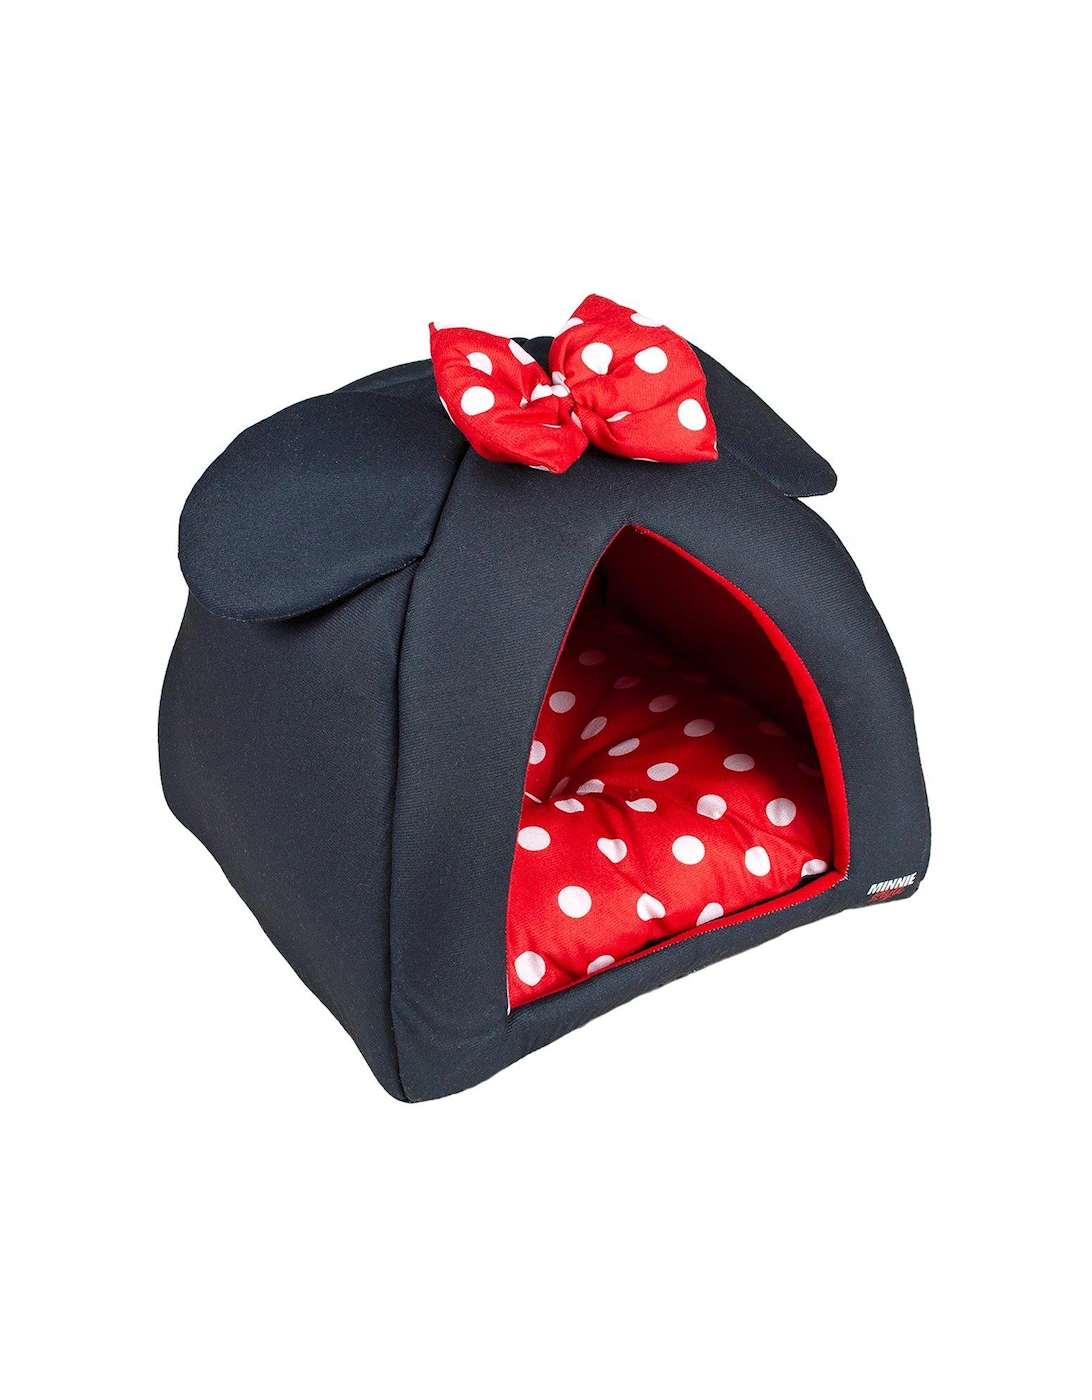 PETS CAVE BED - MINNIE, 2 of 1